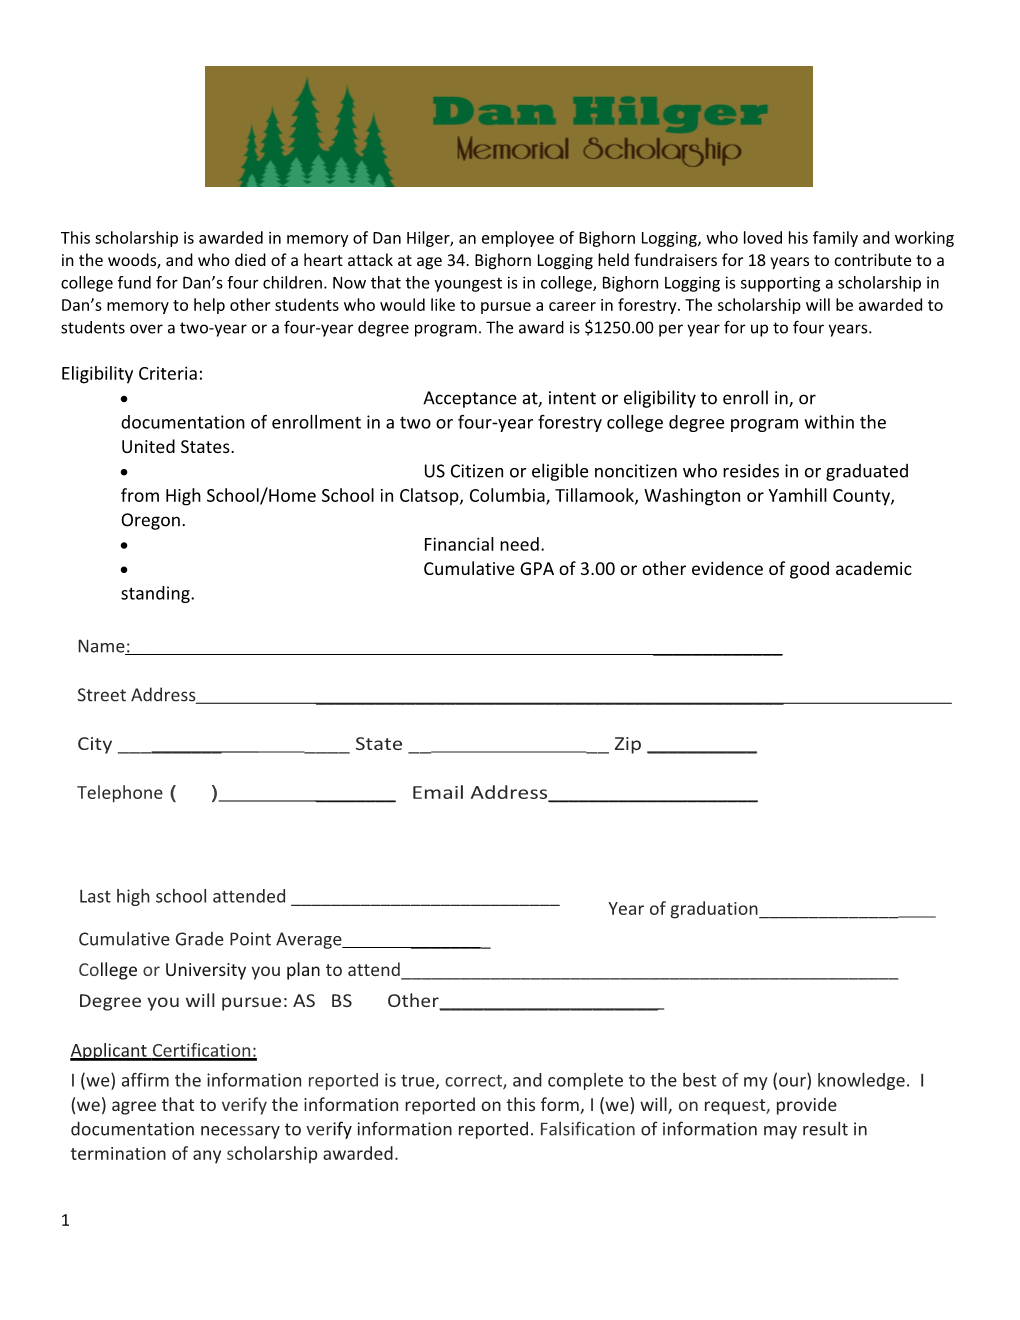 This Scholarship Is Awarded in Memory of Dan Hilger, an Employee of Bighorn Logging, Who